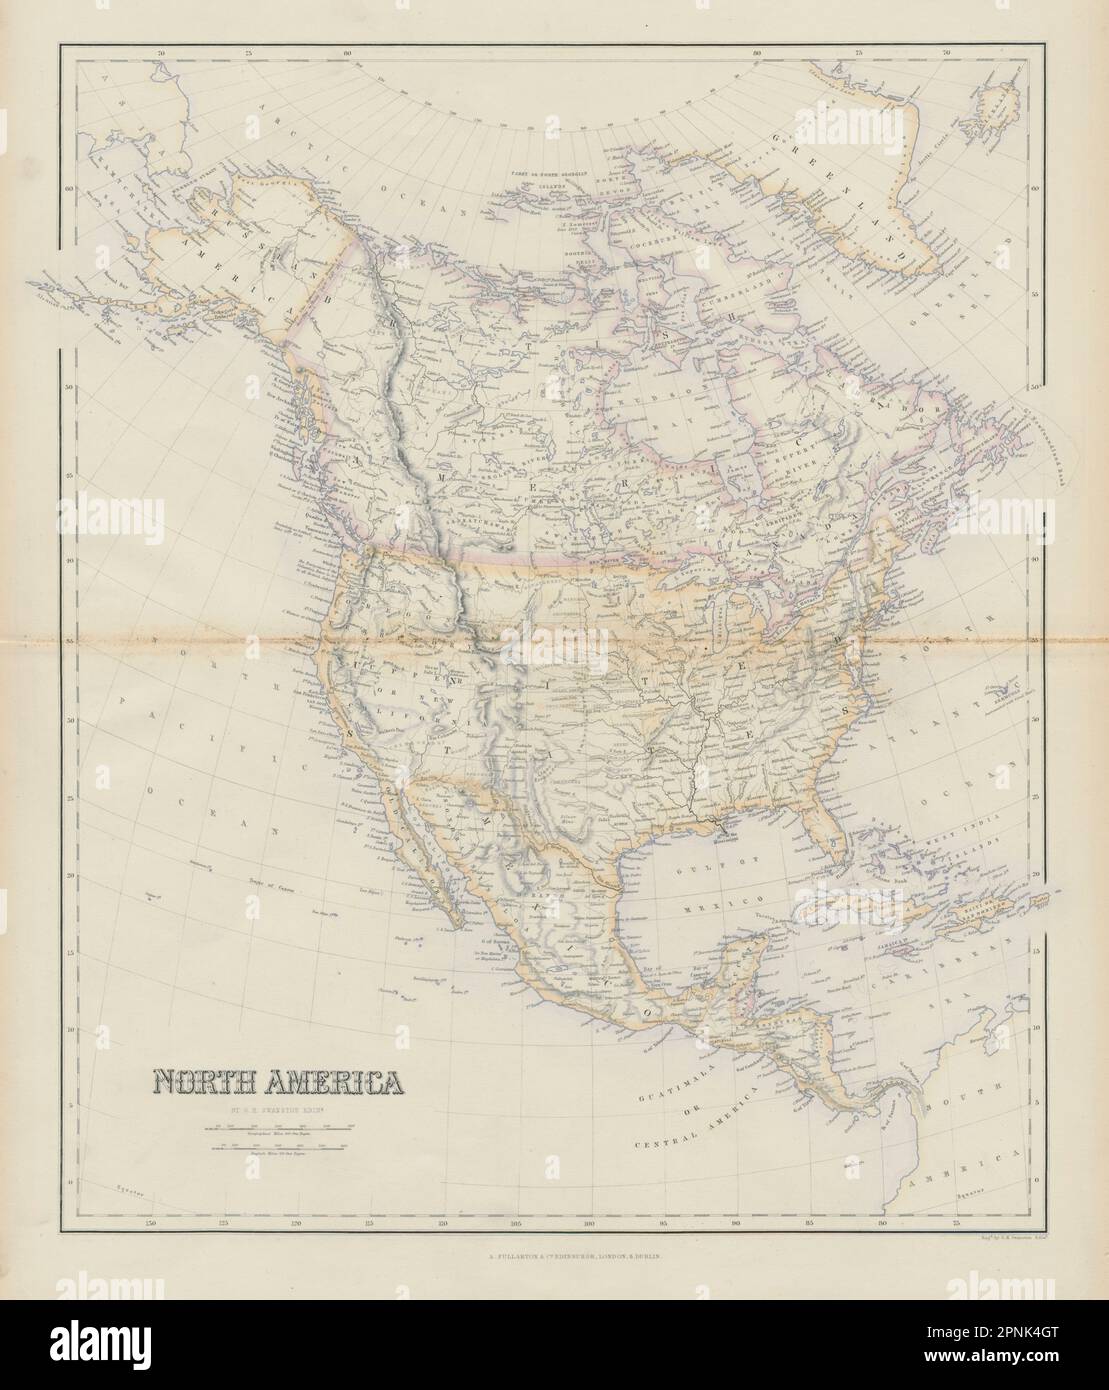 North America. New California. Native America tribes. SWANSTON 1860 old map Stock Photo